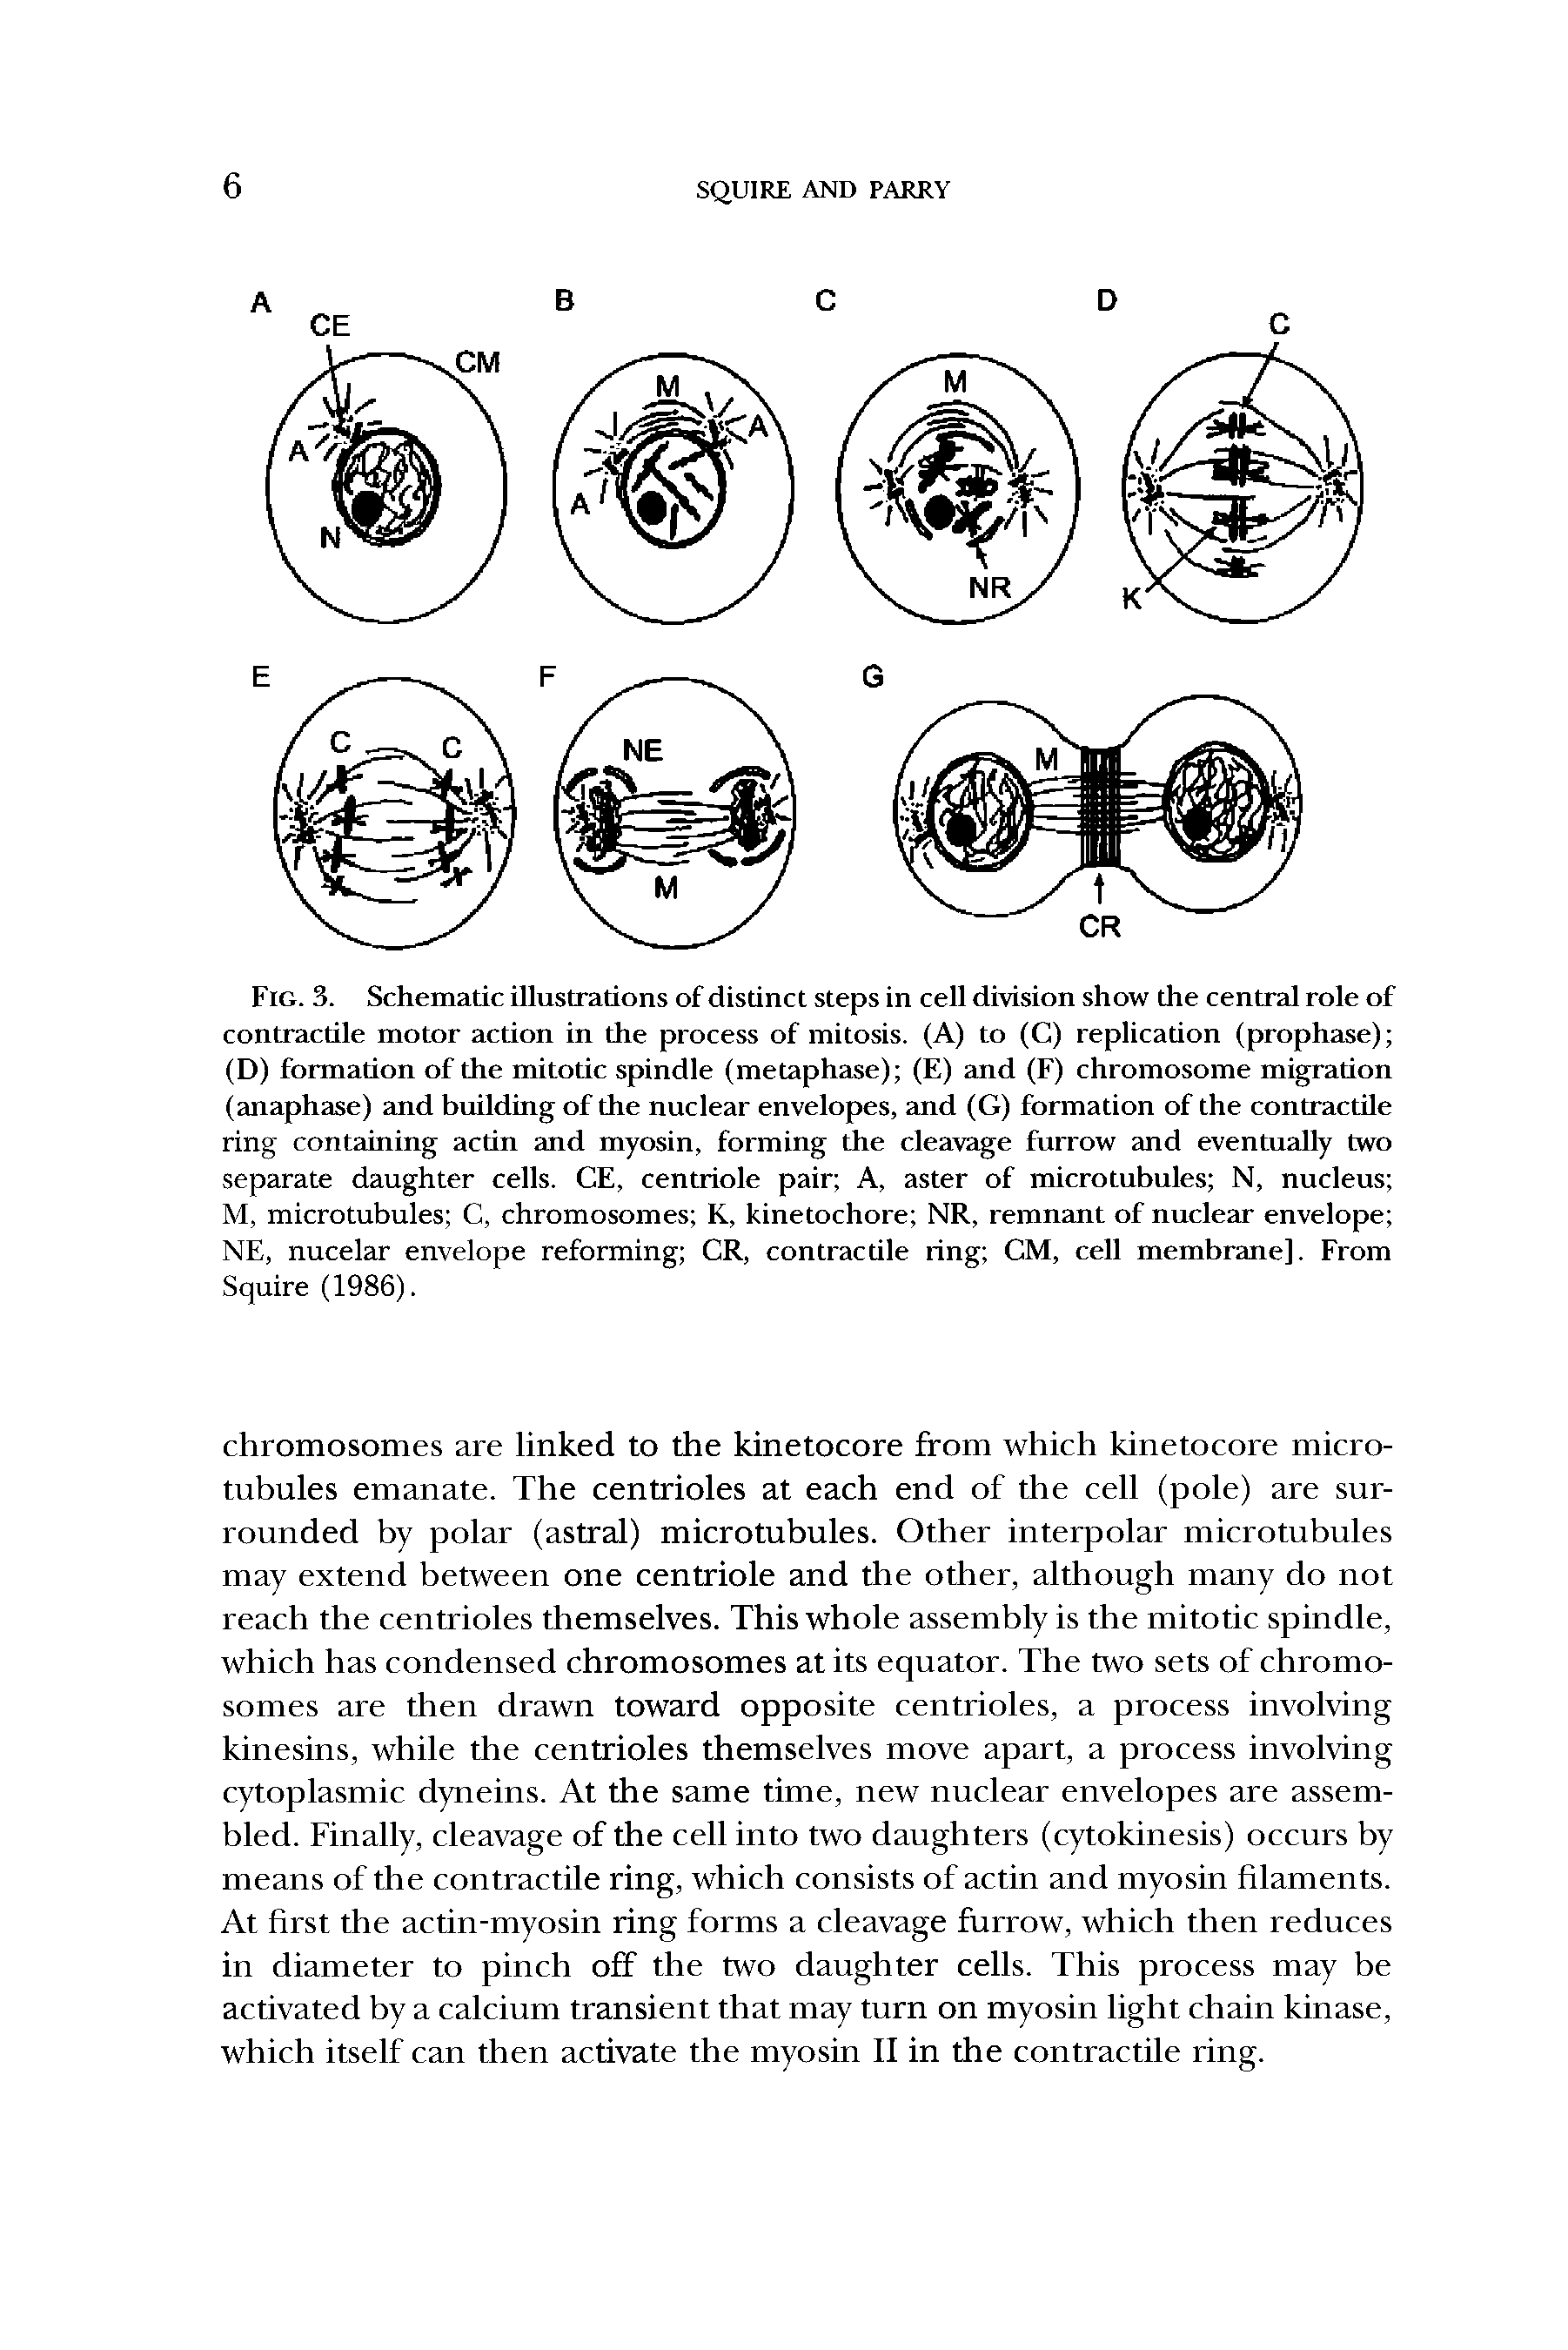 Fig. 3. Schematic illustrations of distinct steps in cell division show the central role of contractile motor action in the process of mitosis. (A) to (C) replication (prophase) (D) formation of the mitotic spindle (metaphase) (E) and (F) chromosome migration (anaphase) and building of the nuclear envelopes, and (G) formation of the contractile ring containing actin and myosin, forming the cleavage furrow and eventually two separate daughter cells. CE, centriole pair A, aster of microtubules N, nucleus M, microtubules C, chromosomes K, kinetochore NR, remnant of nuclear envelope NE, nucelar envelope reforming CR, contractile ring CM, cell membrane]. From Squire (1986).